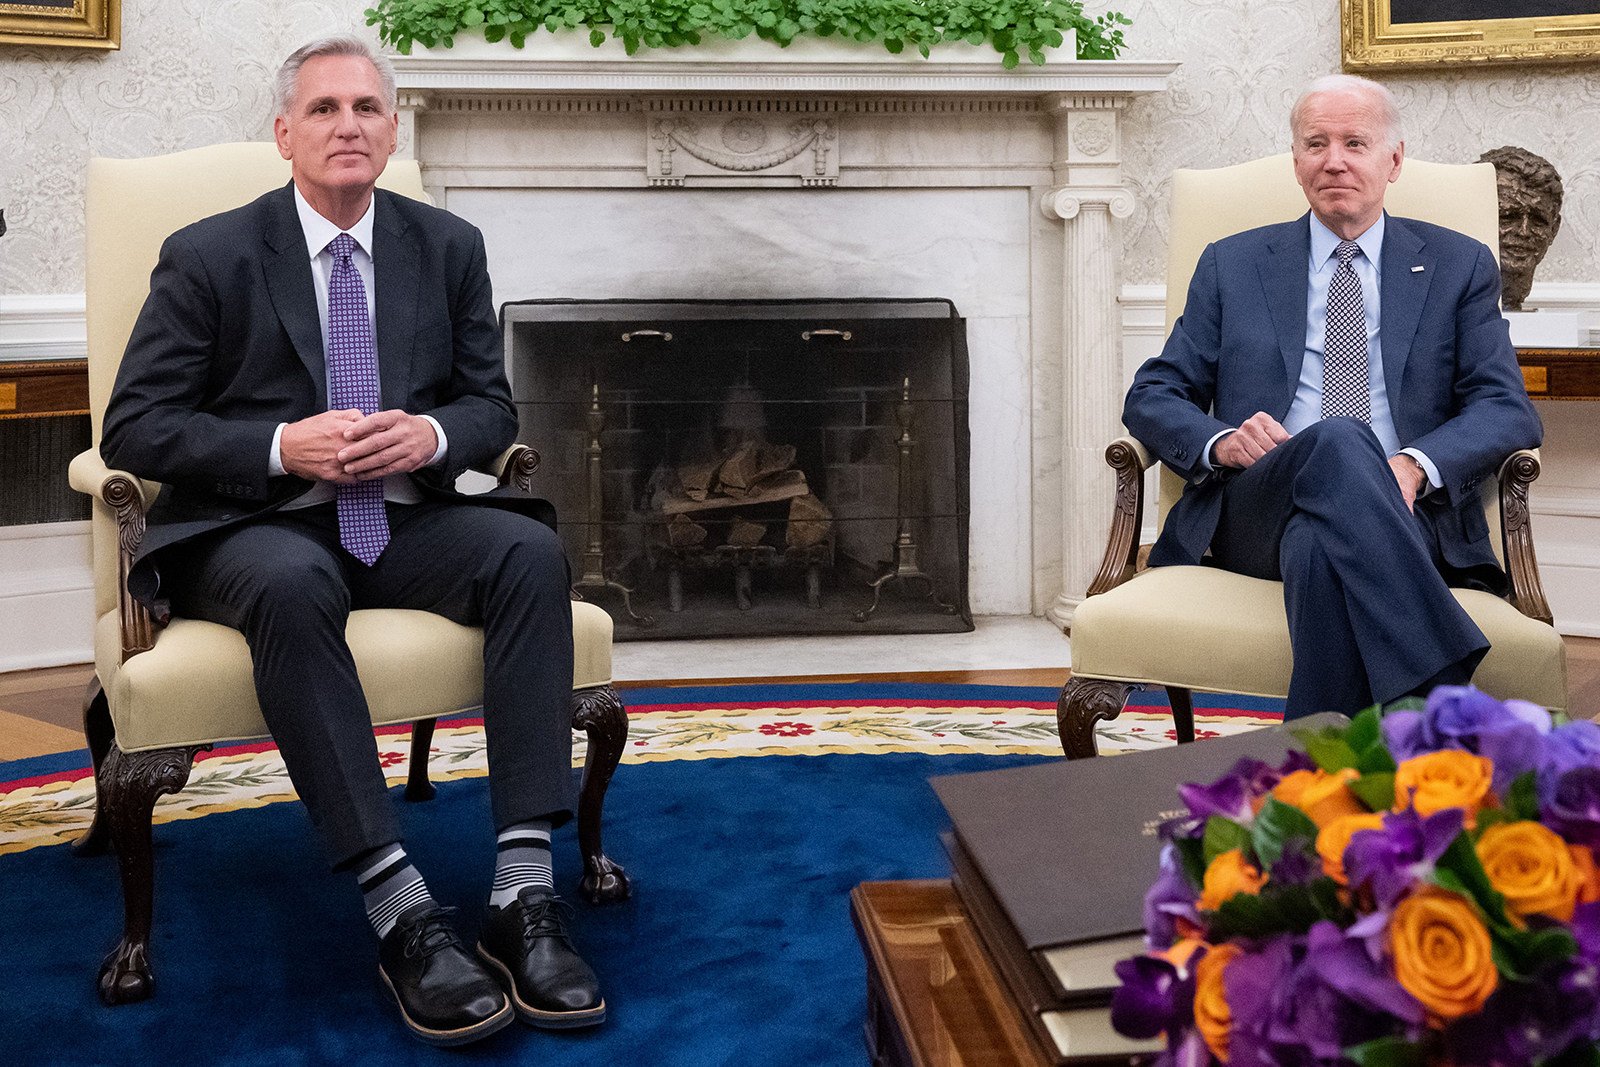 US President Joe Biden and House Speaker Kevin McCarthy in the Oval Office of the White House in Washington on May 22. Photo: AFP via Getty Images / TNS